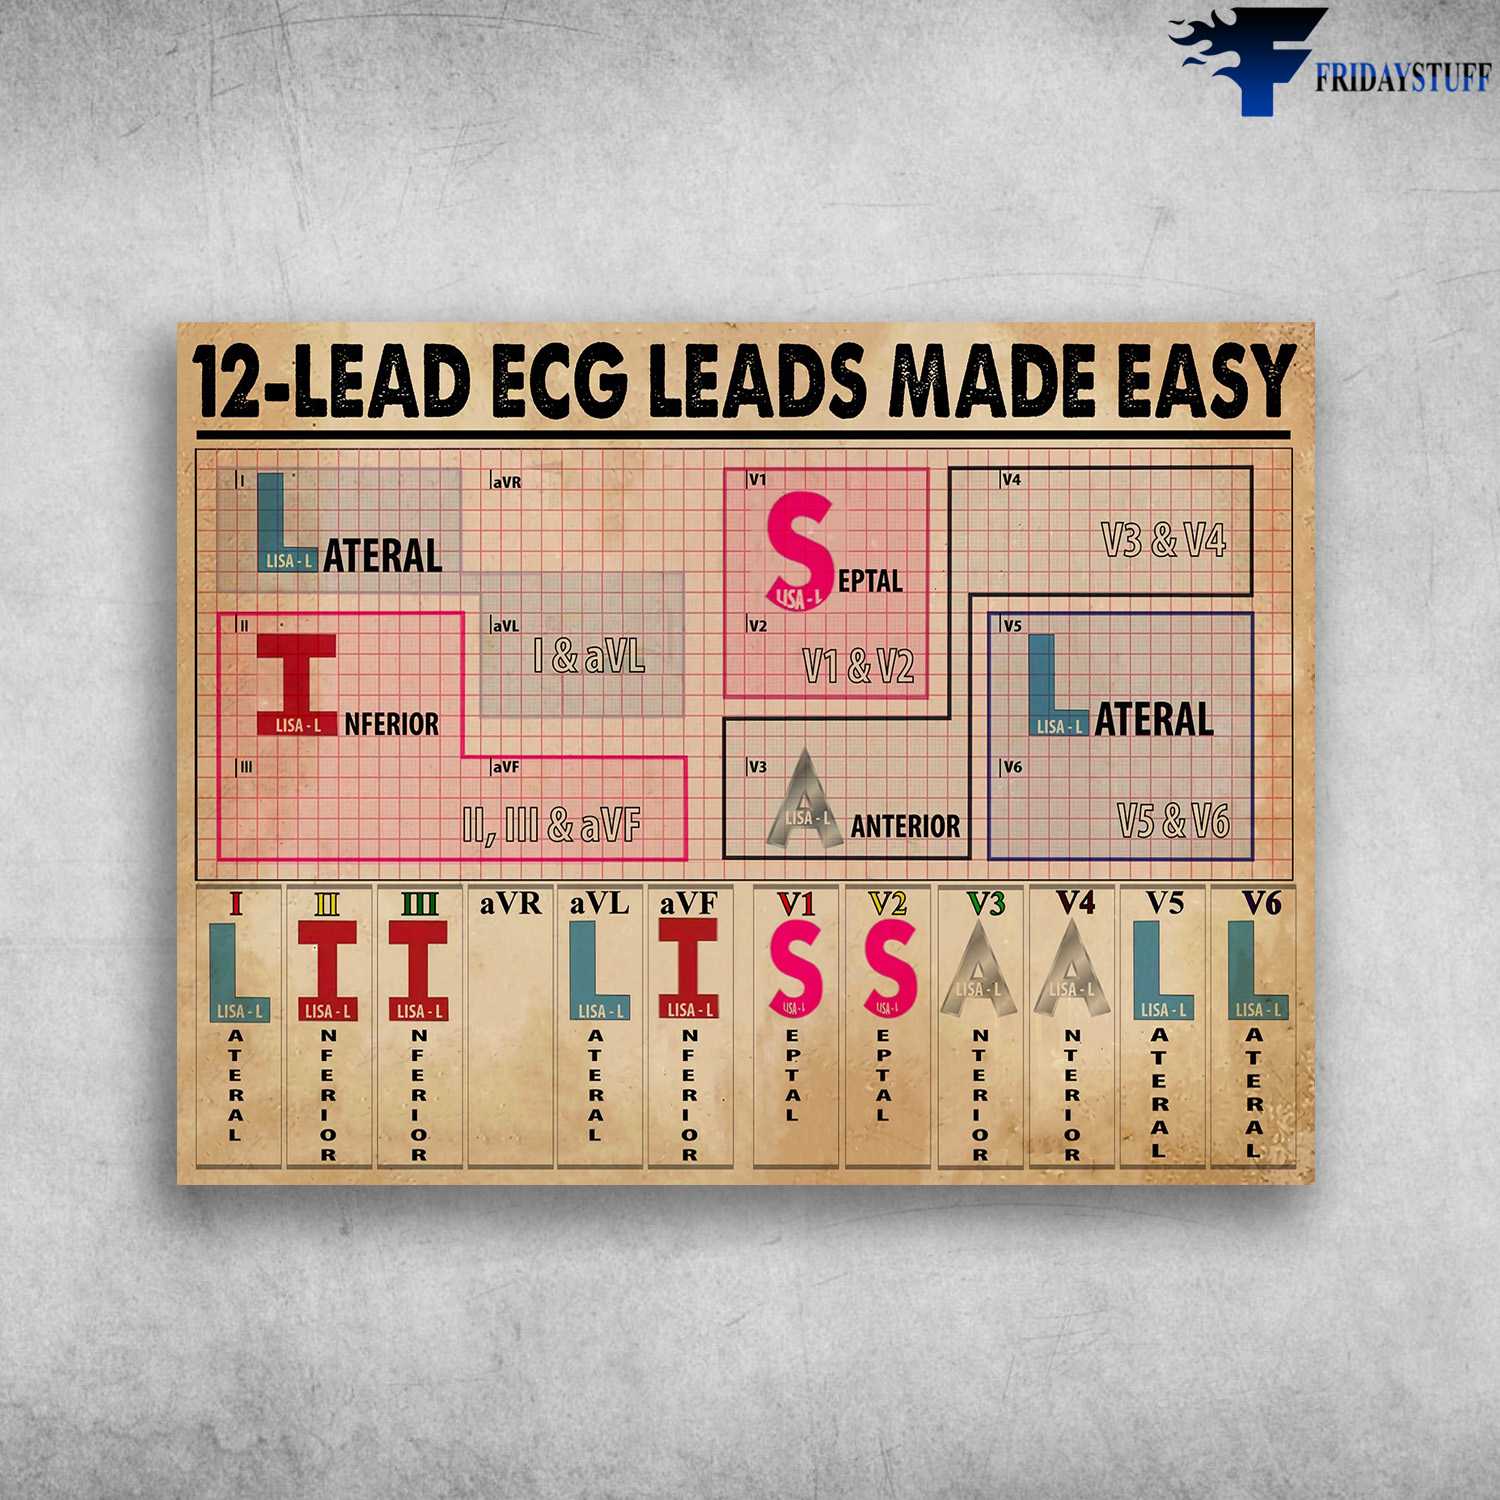 12-Lead Ecg Leads Made Easy, Lateral, Septal, Inferior, Anterior